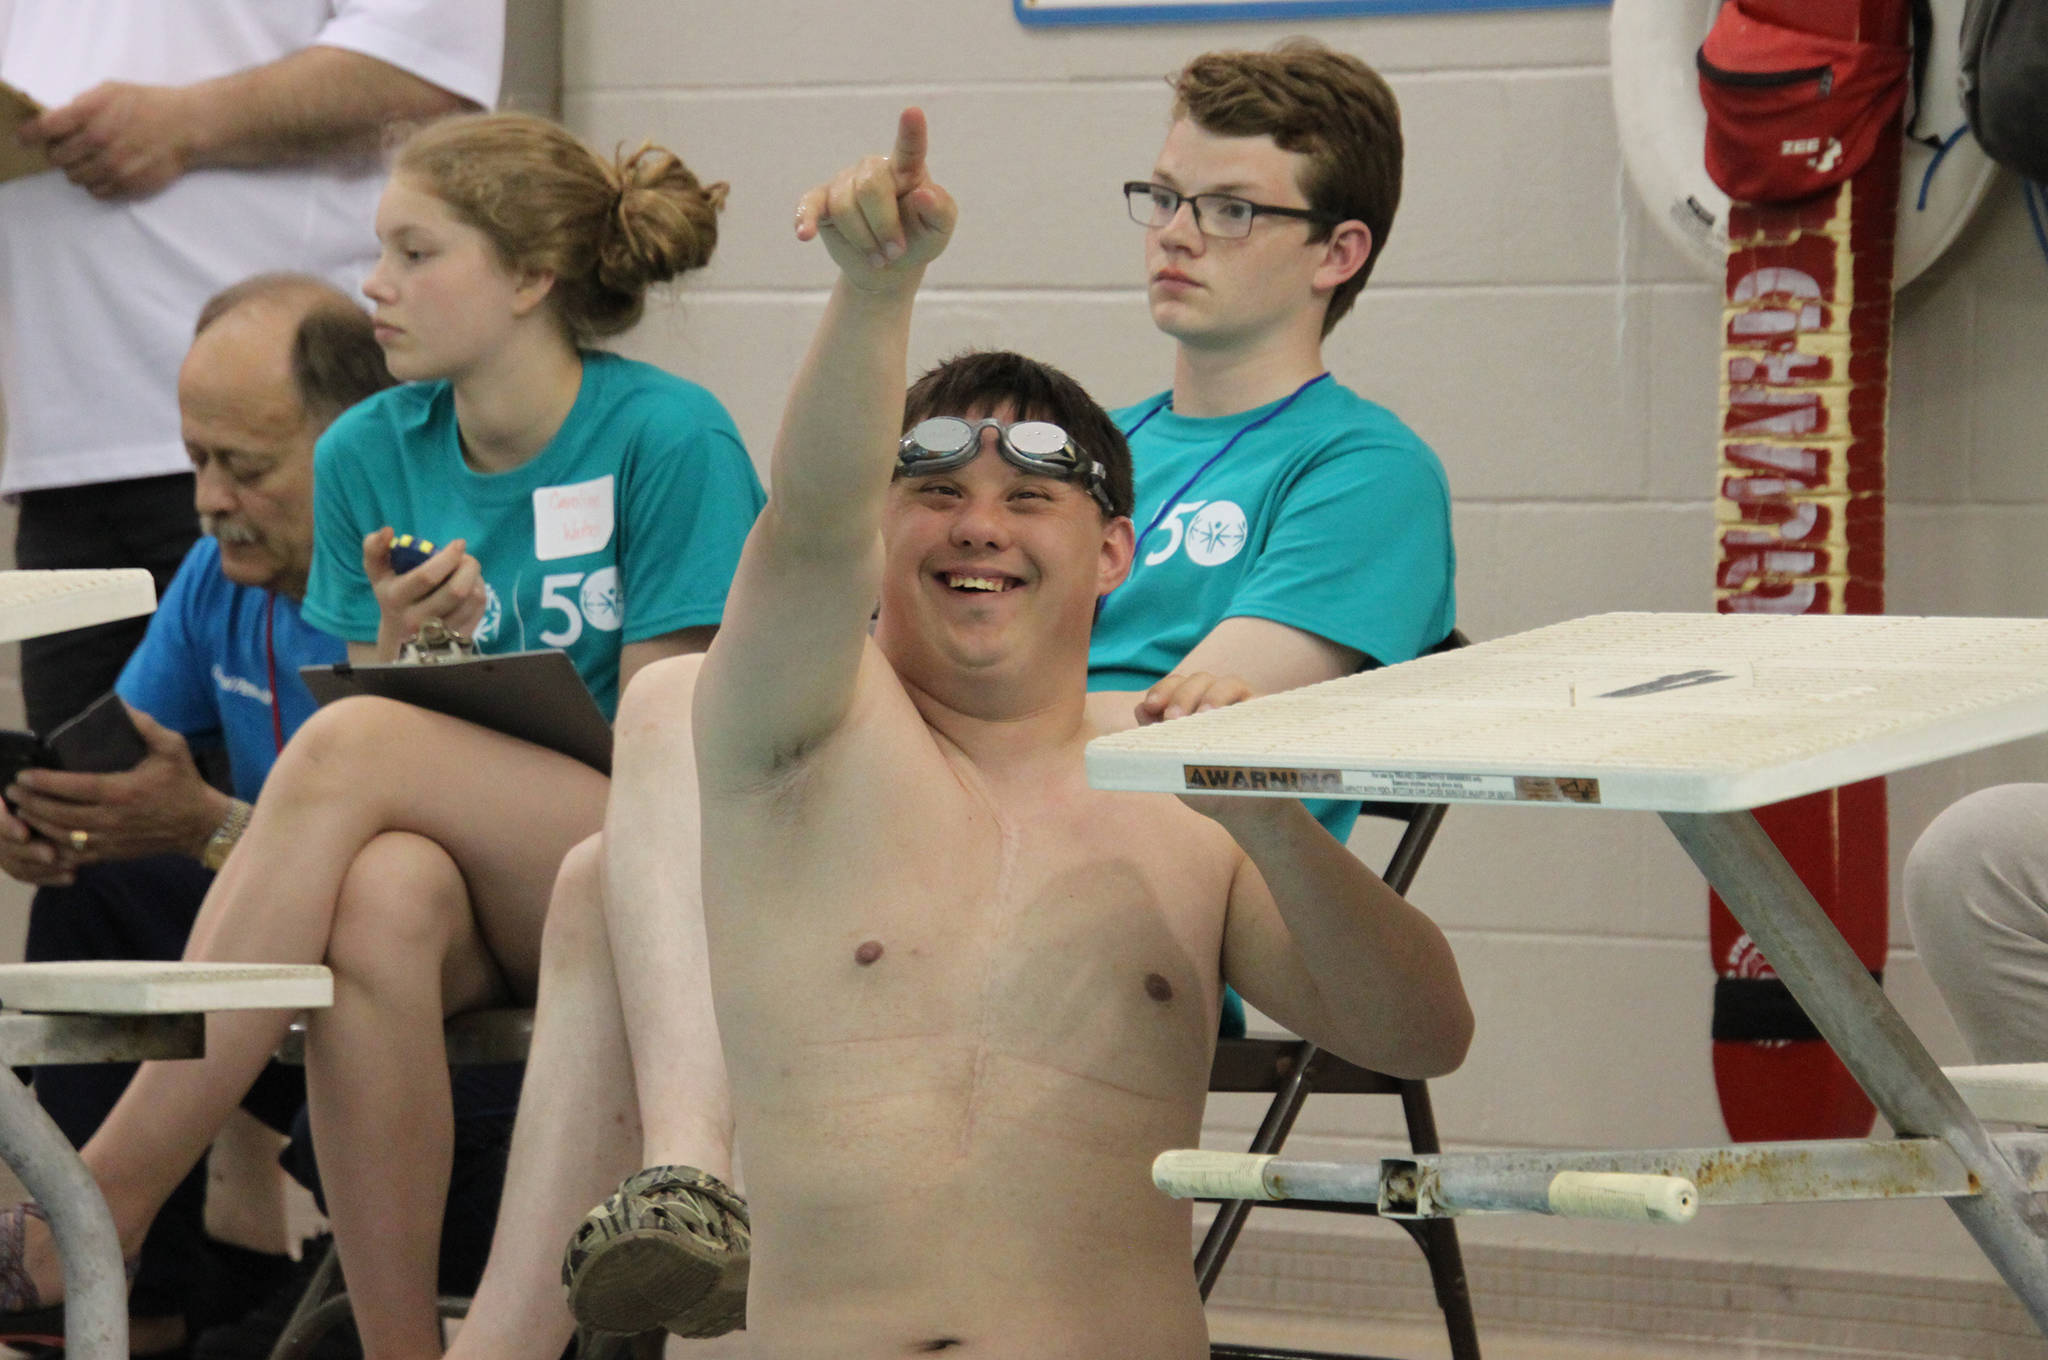 Juneau’s CJ Umbs acknowledges supporters in the stands during the aquatics events at the Special Olympics Summer Games in Anchorage on Saturday, June 8, 2019. (Courtesy Photo | Special Olympics Alaska)